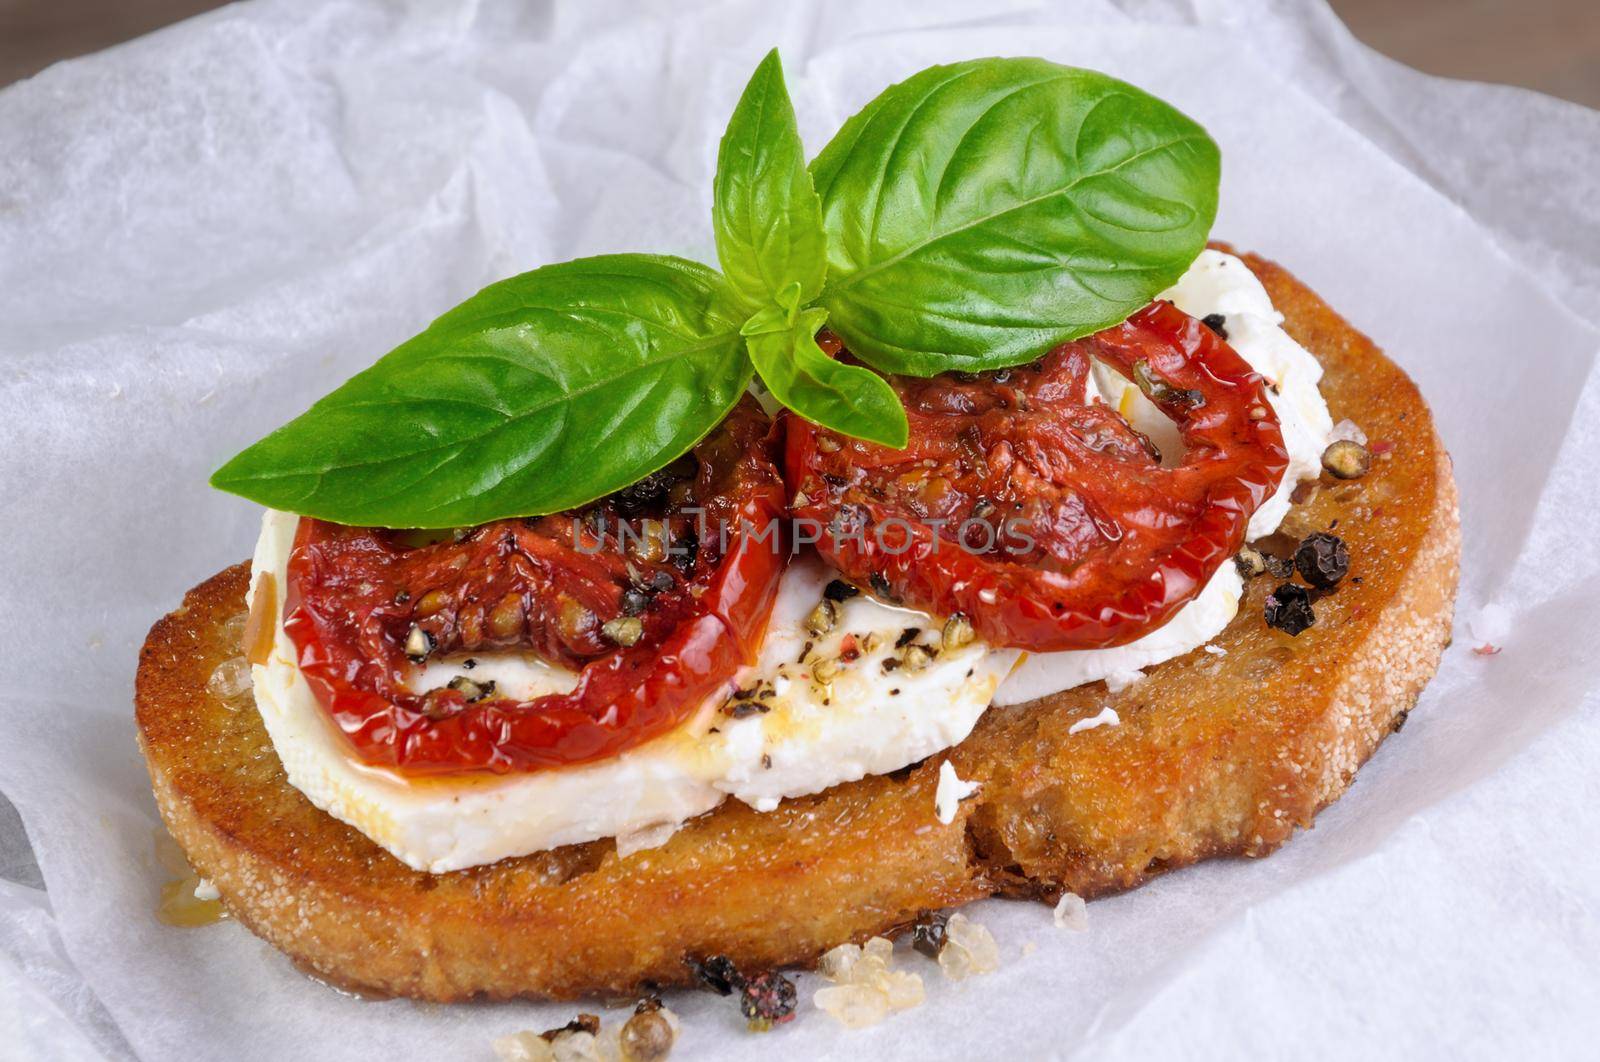 Bruschetta with feta and tomatoes by Apolonia